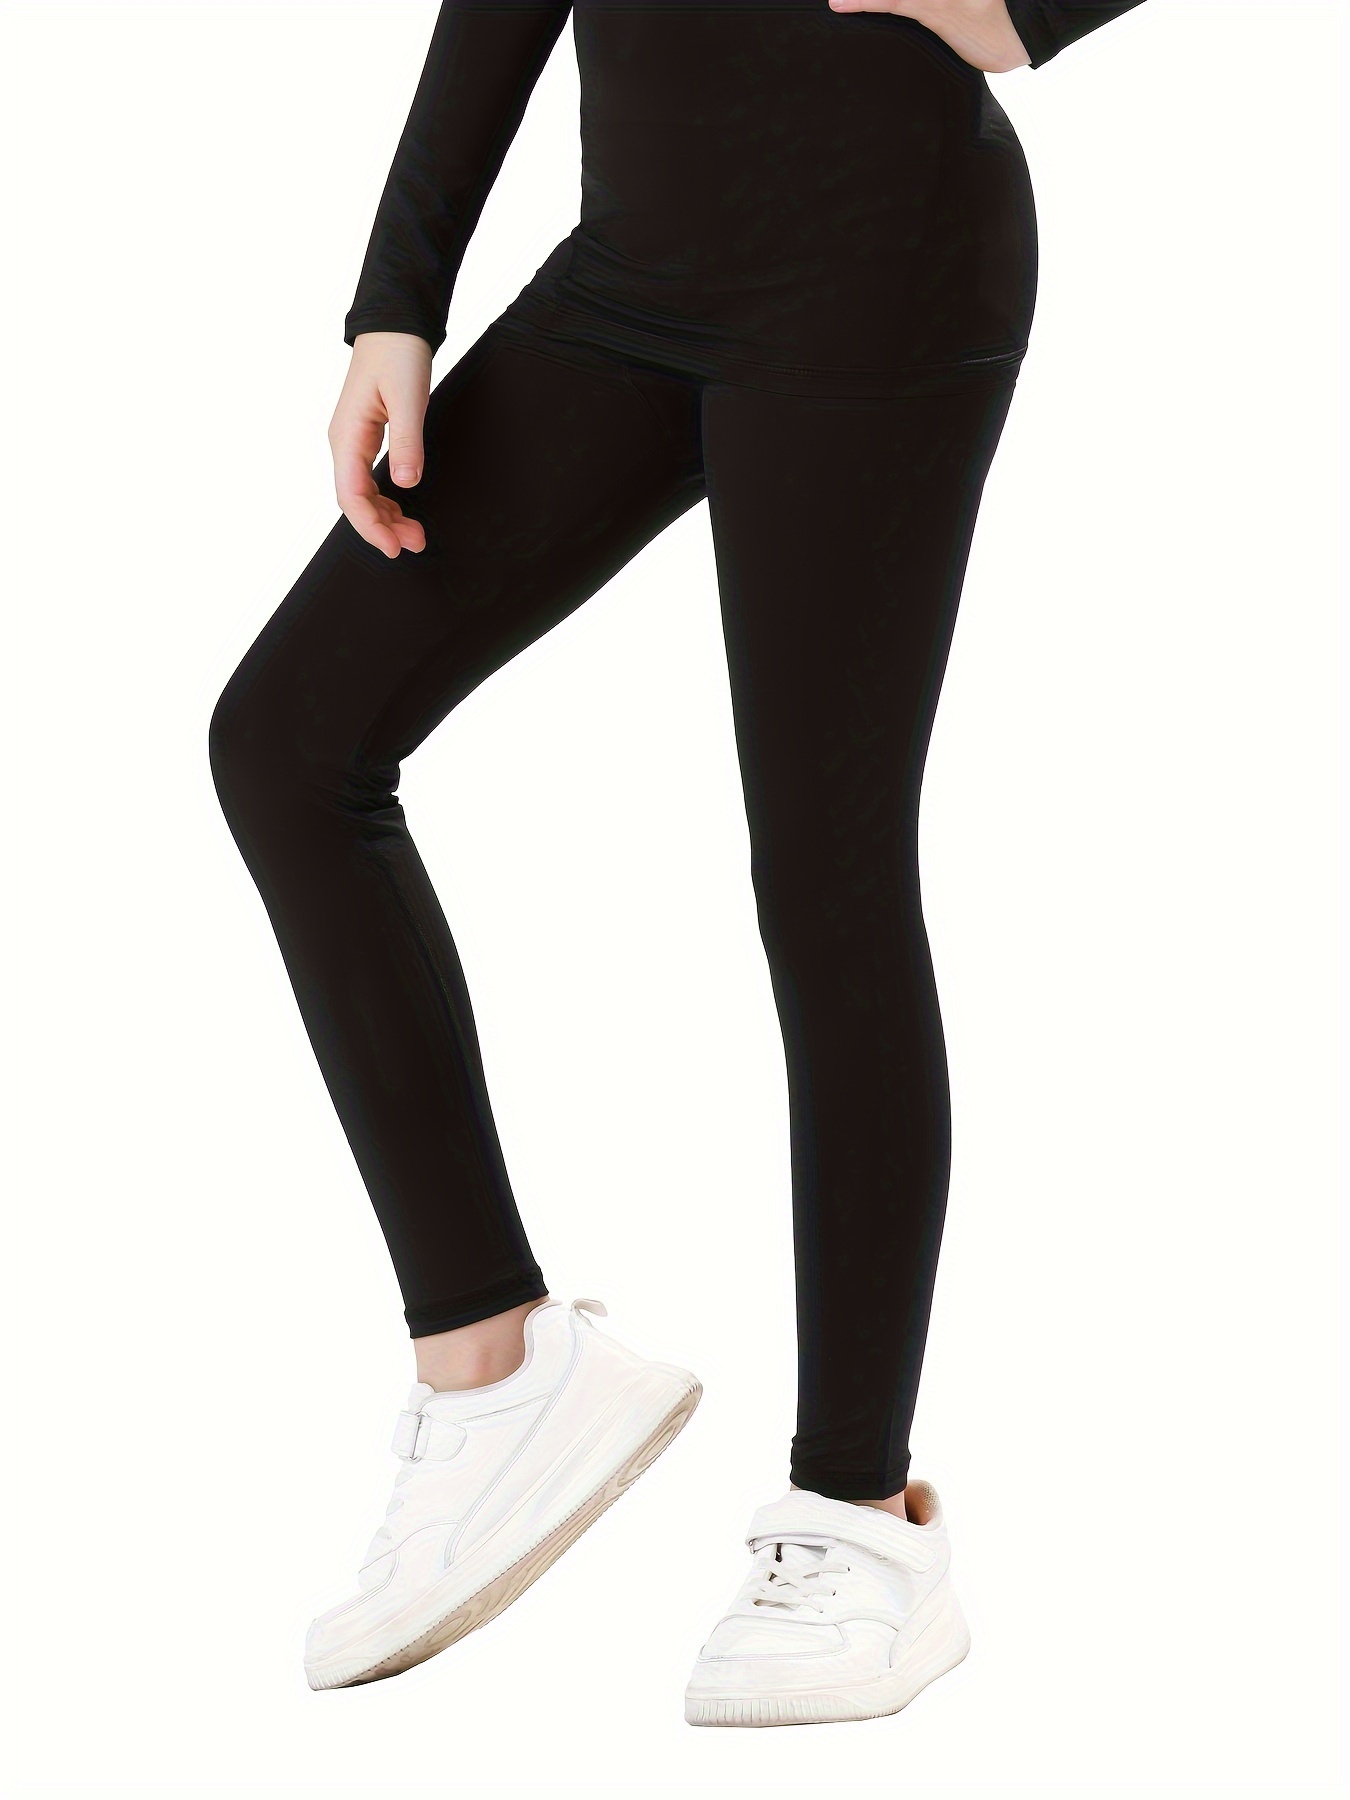 Base » Women's Recovery Tights - Black